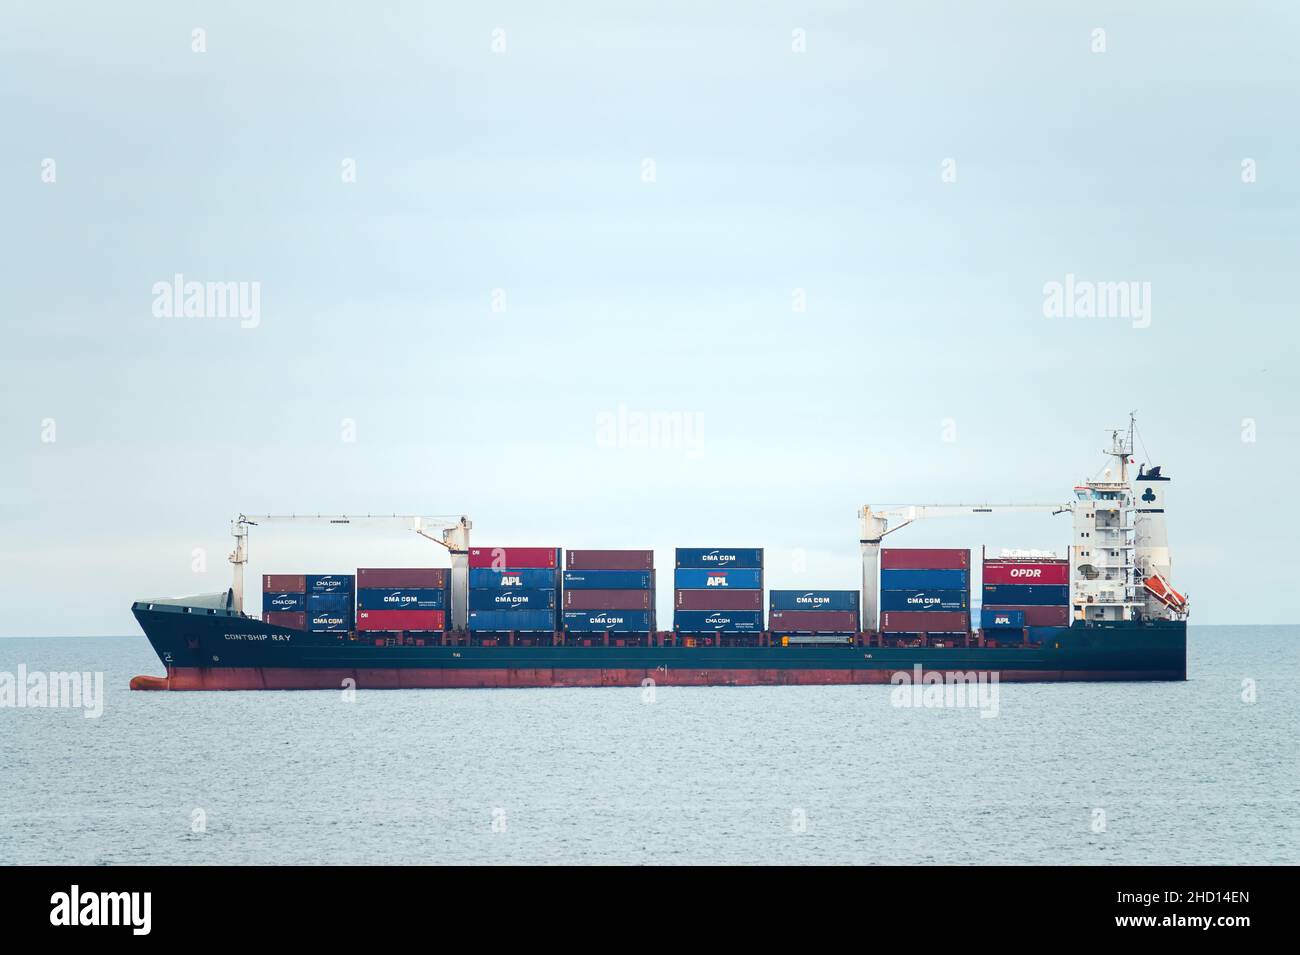 Container cargo ship, profile view, transport of shipping goods. Genova Italy - December 2021 Stock Photo